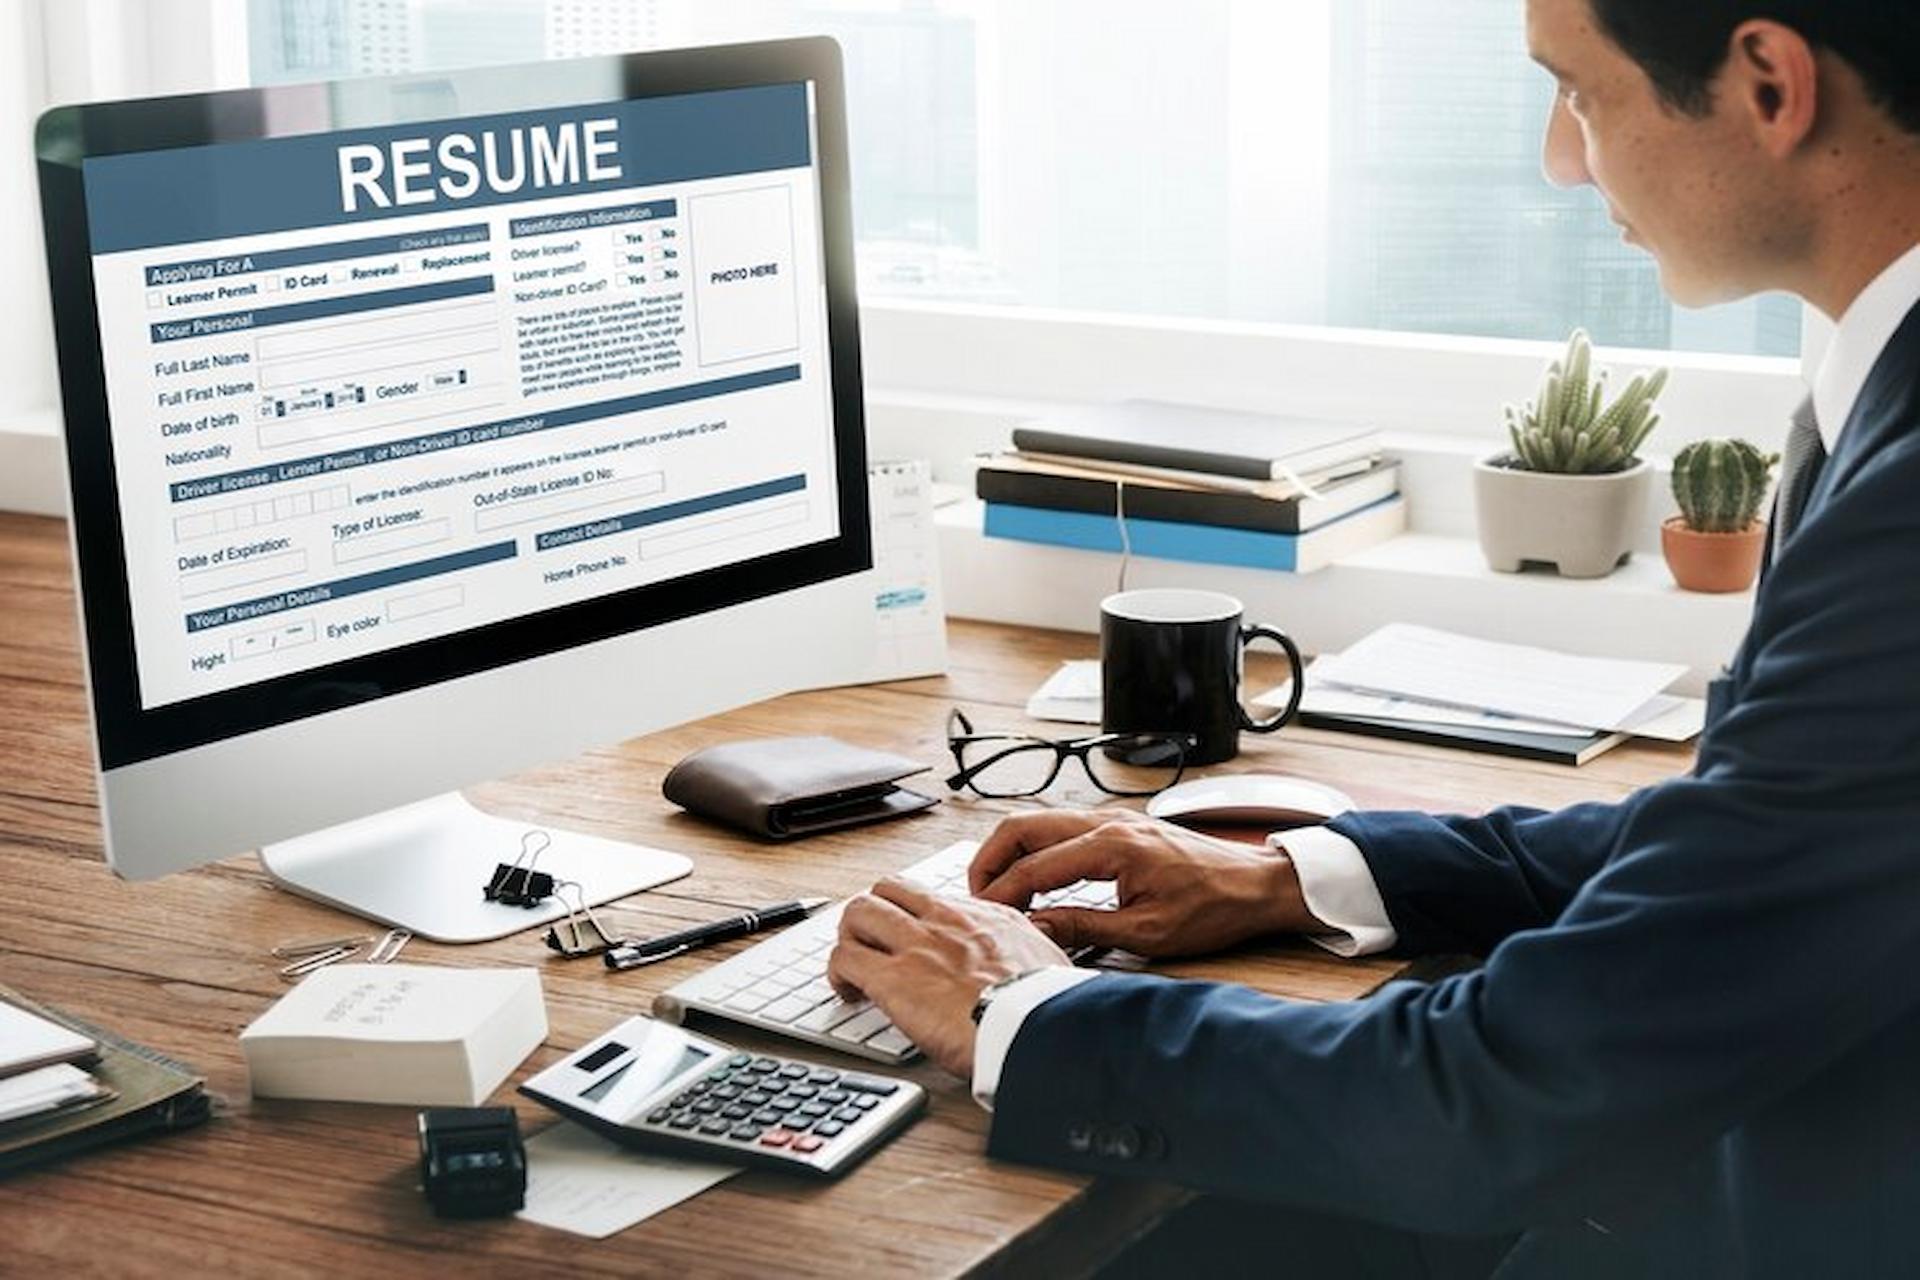 Analyse Data To Optimise Your CV Proper